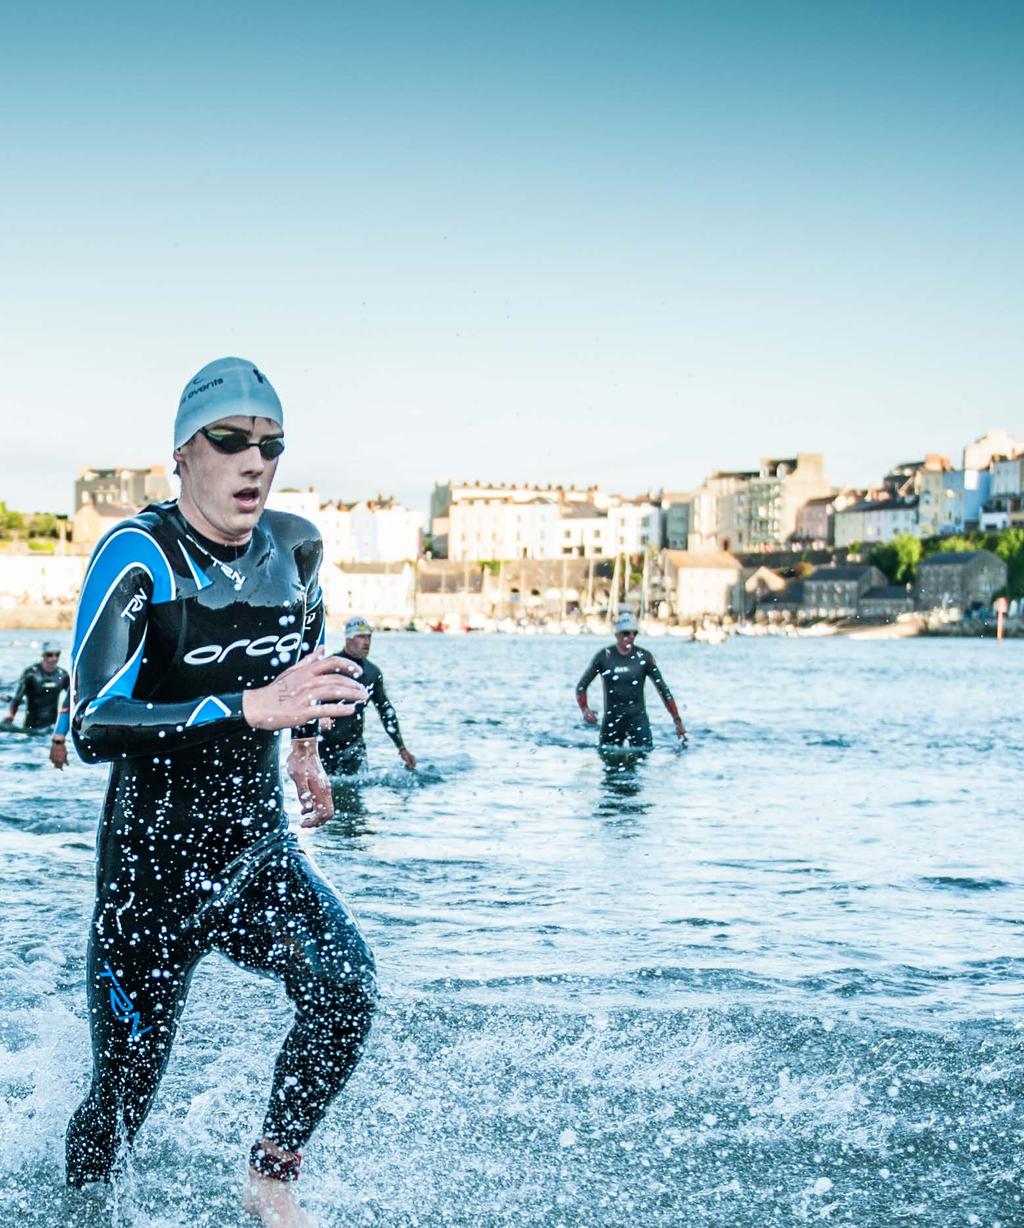 THE WALES SWIM FRIDAY 8 JULY 2016 NORTH BEACH, TENBY Full - 2.4 mile swim Short - 1.2 mile swim Friday evening is the opening challenge of the Long Course Weekend.